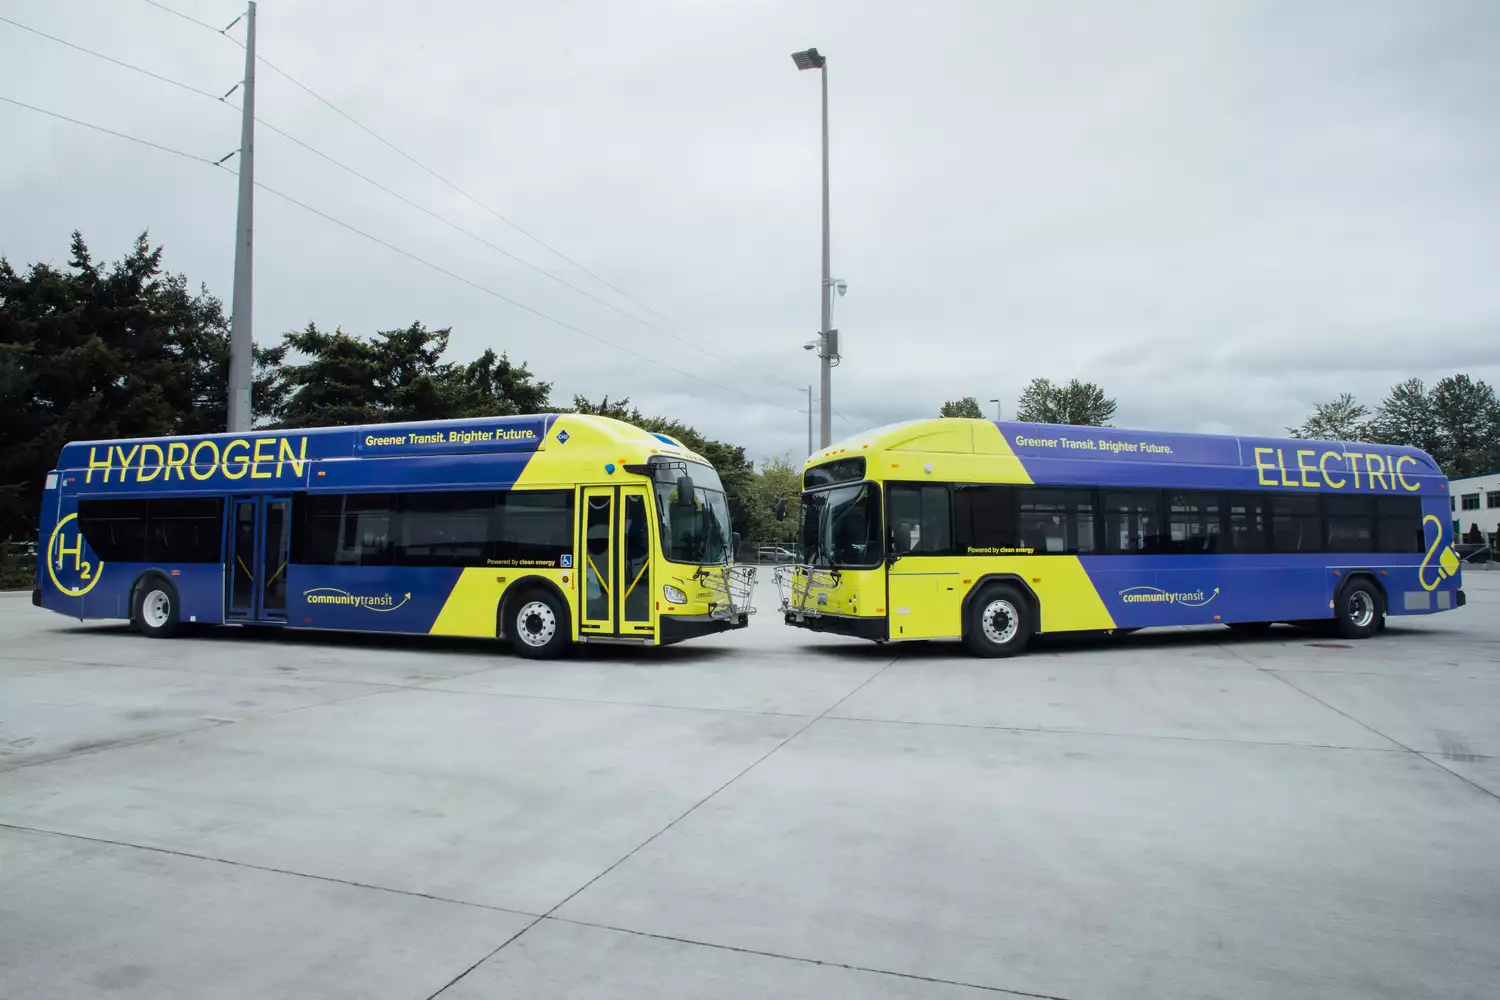 Zero emission hydrogen and battery electric buses